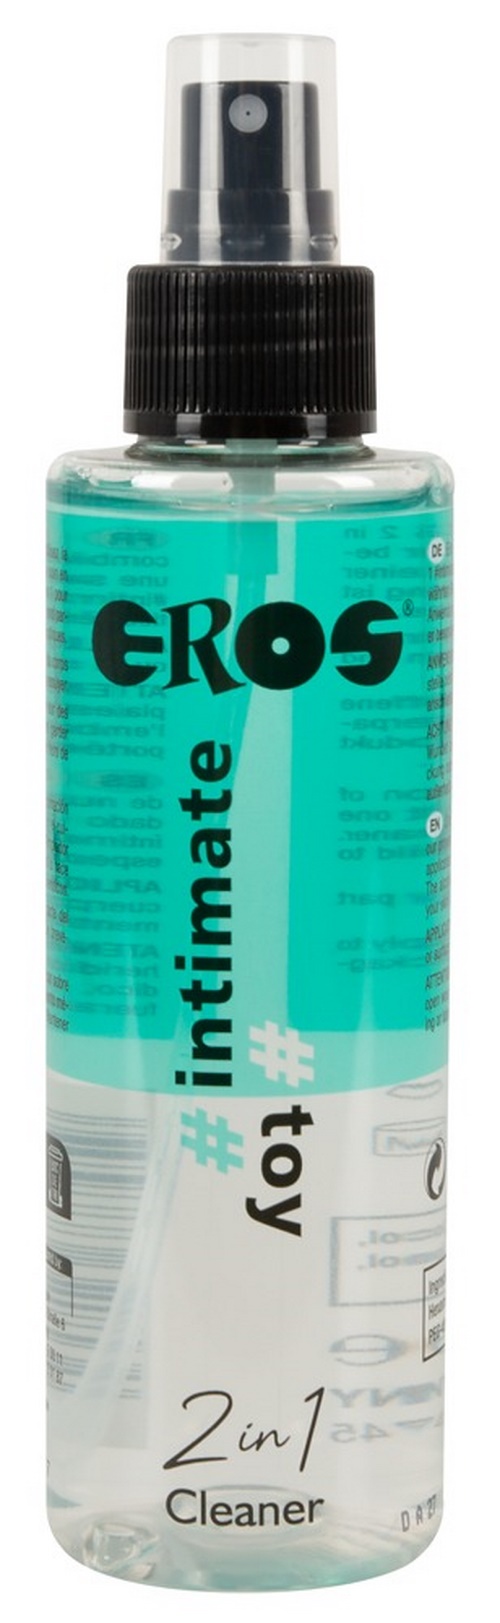 Eros 2-in-1 intimate & toy cleaner, 150 ml